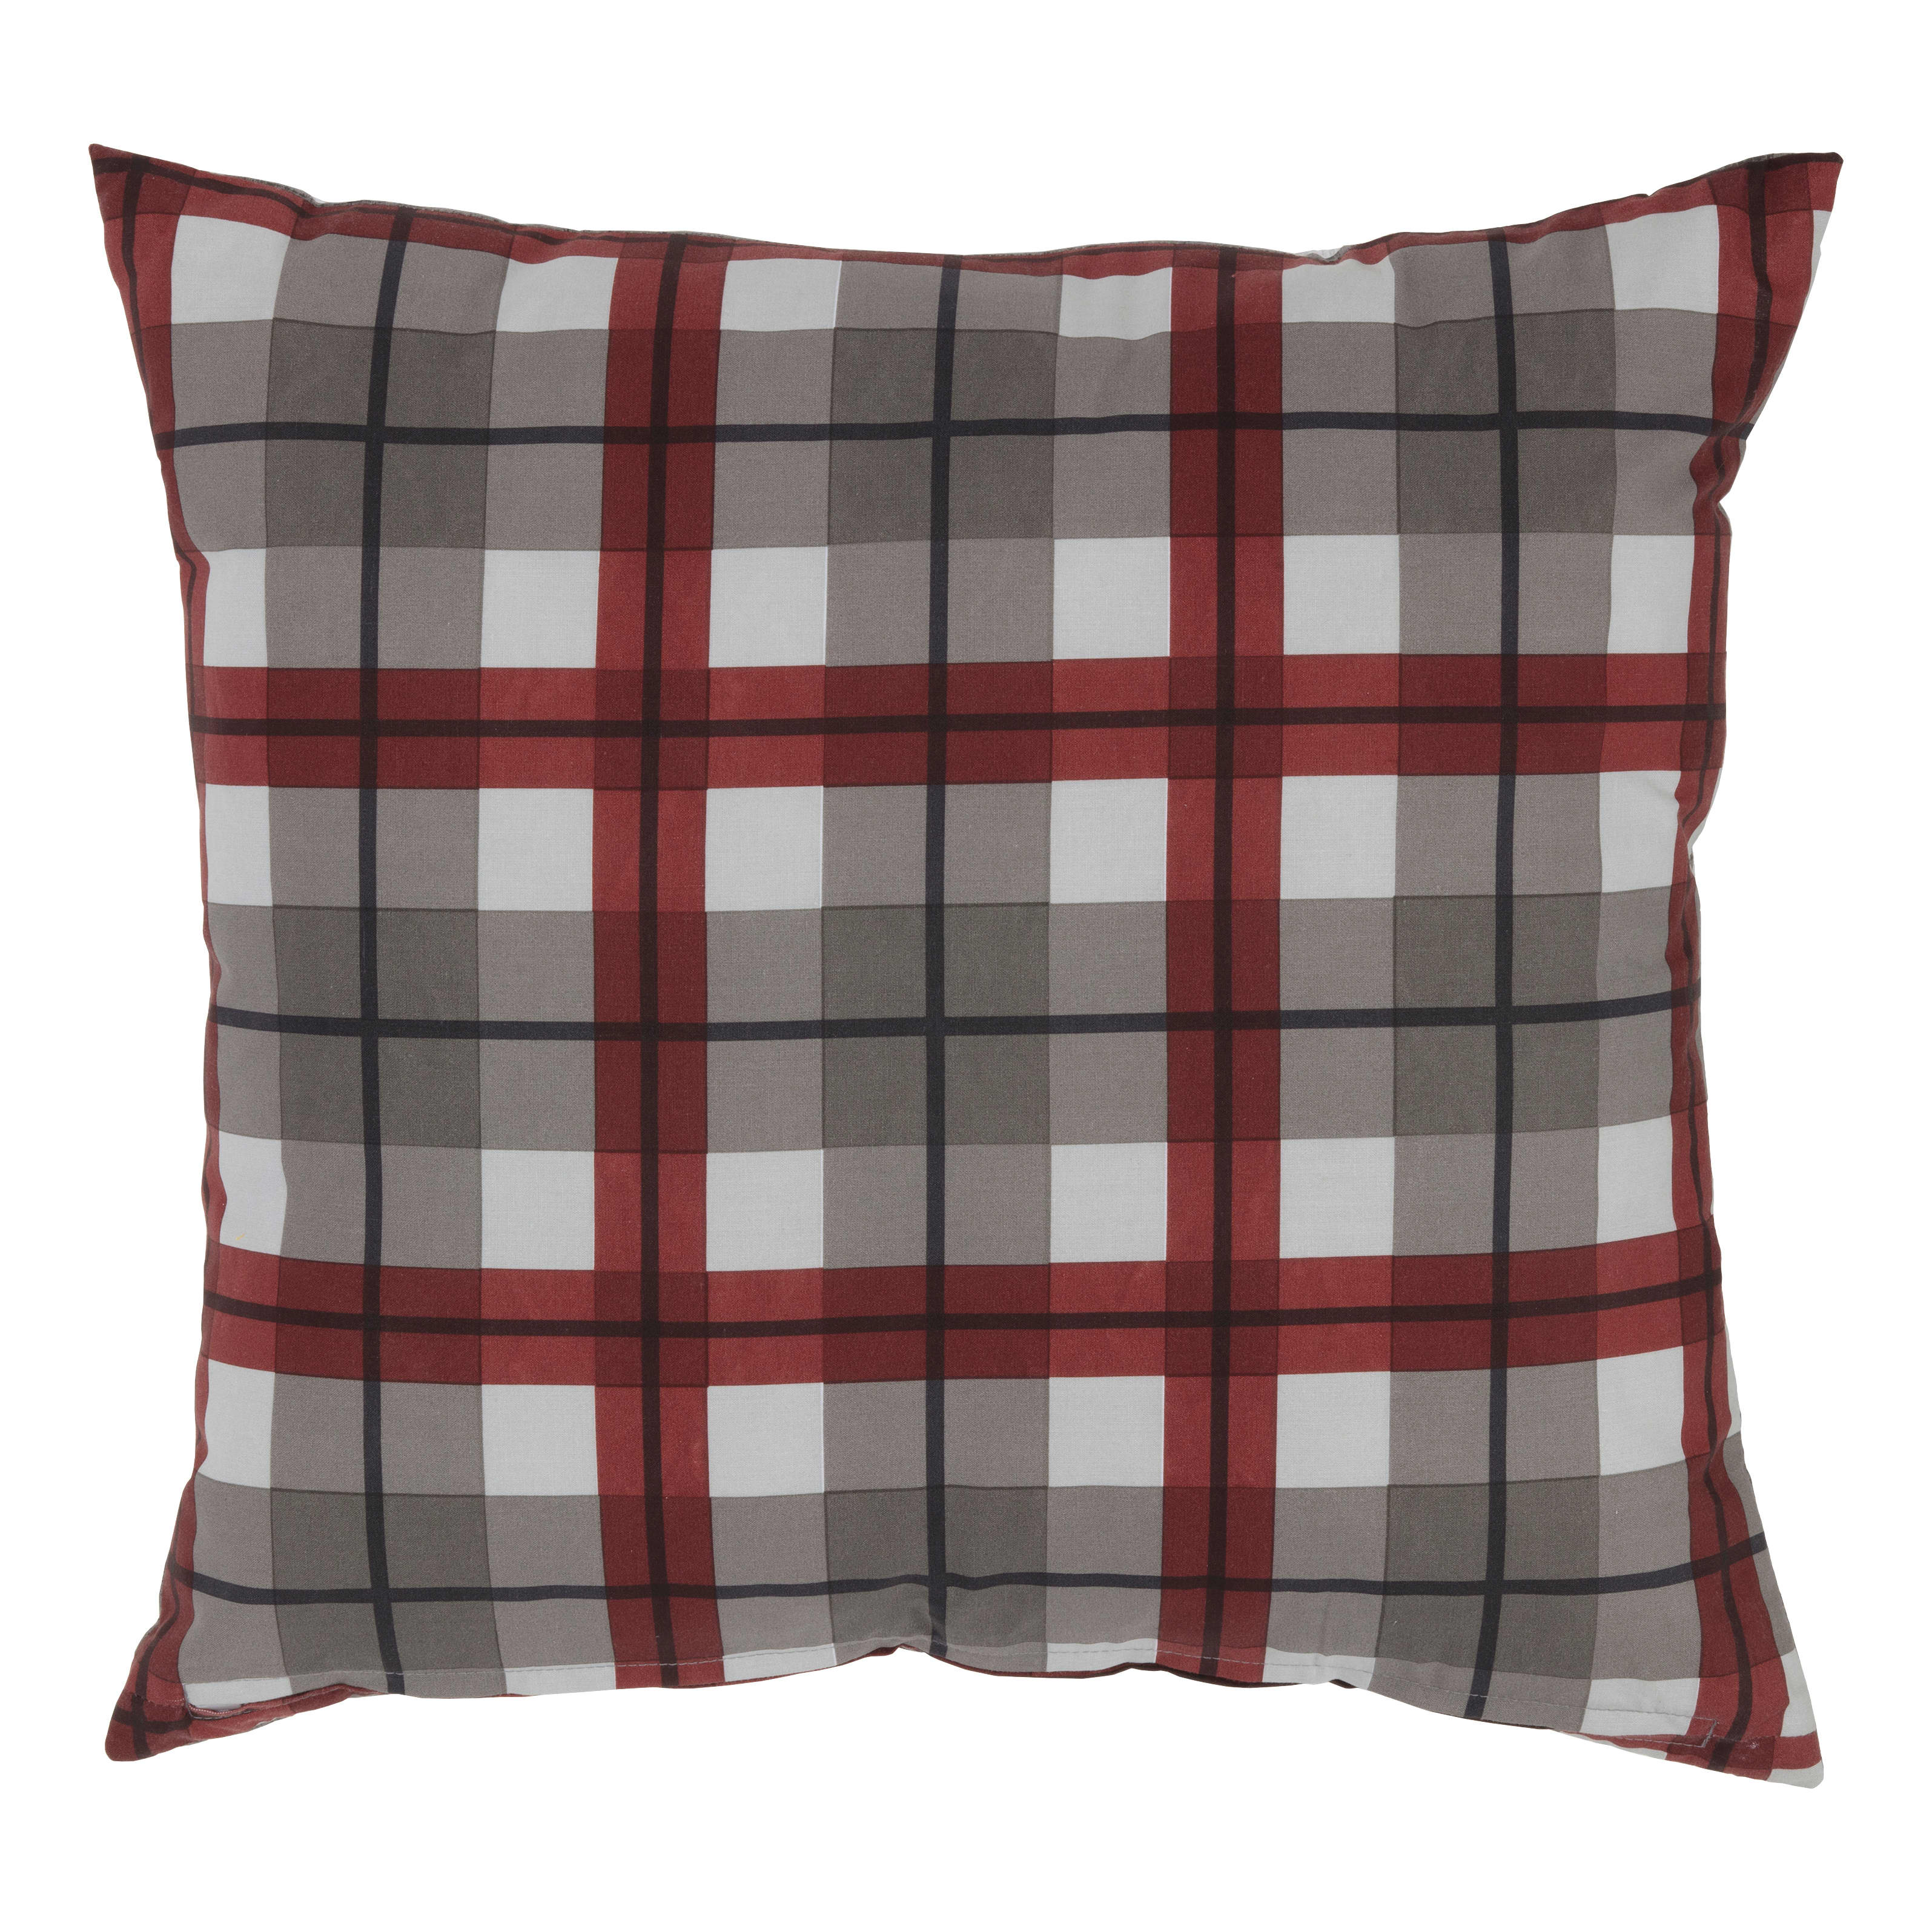 White River Alaskan Wildlife Collection Bear Plaid Decorative Pillow - Opposite Side View